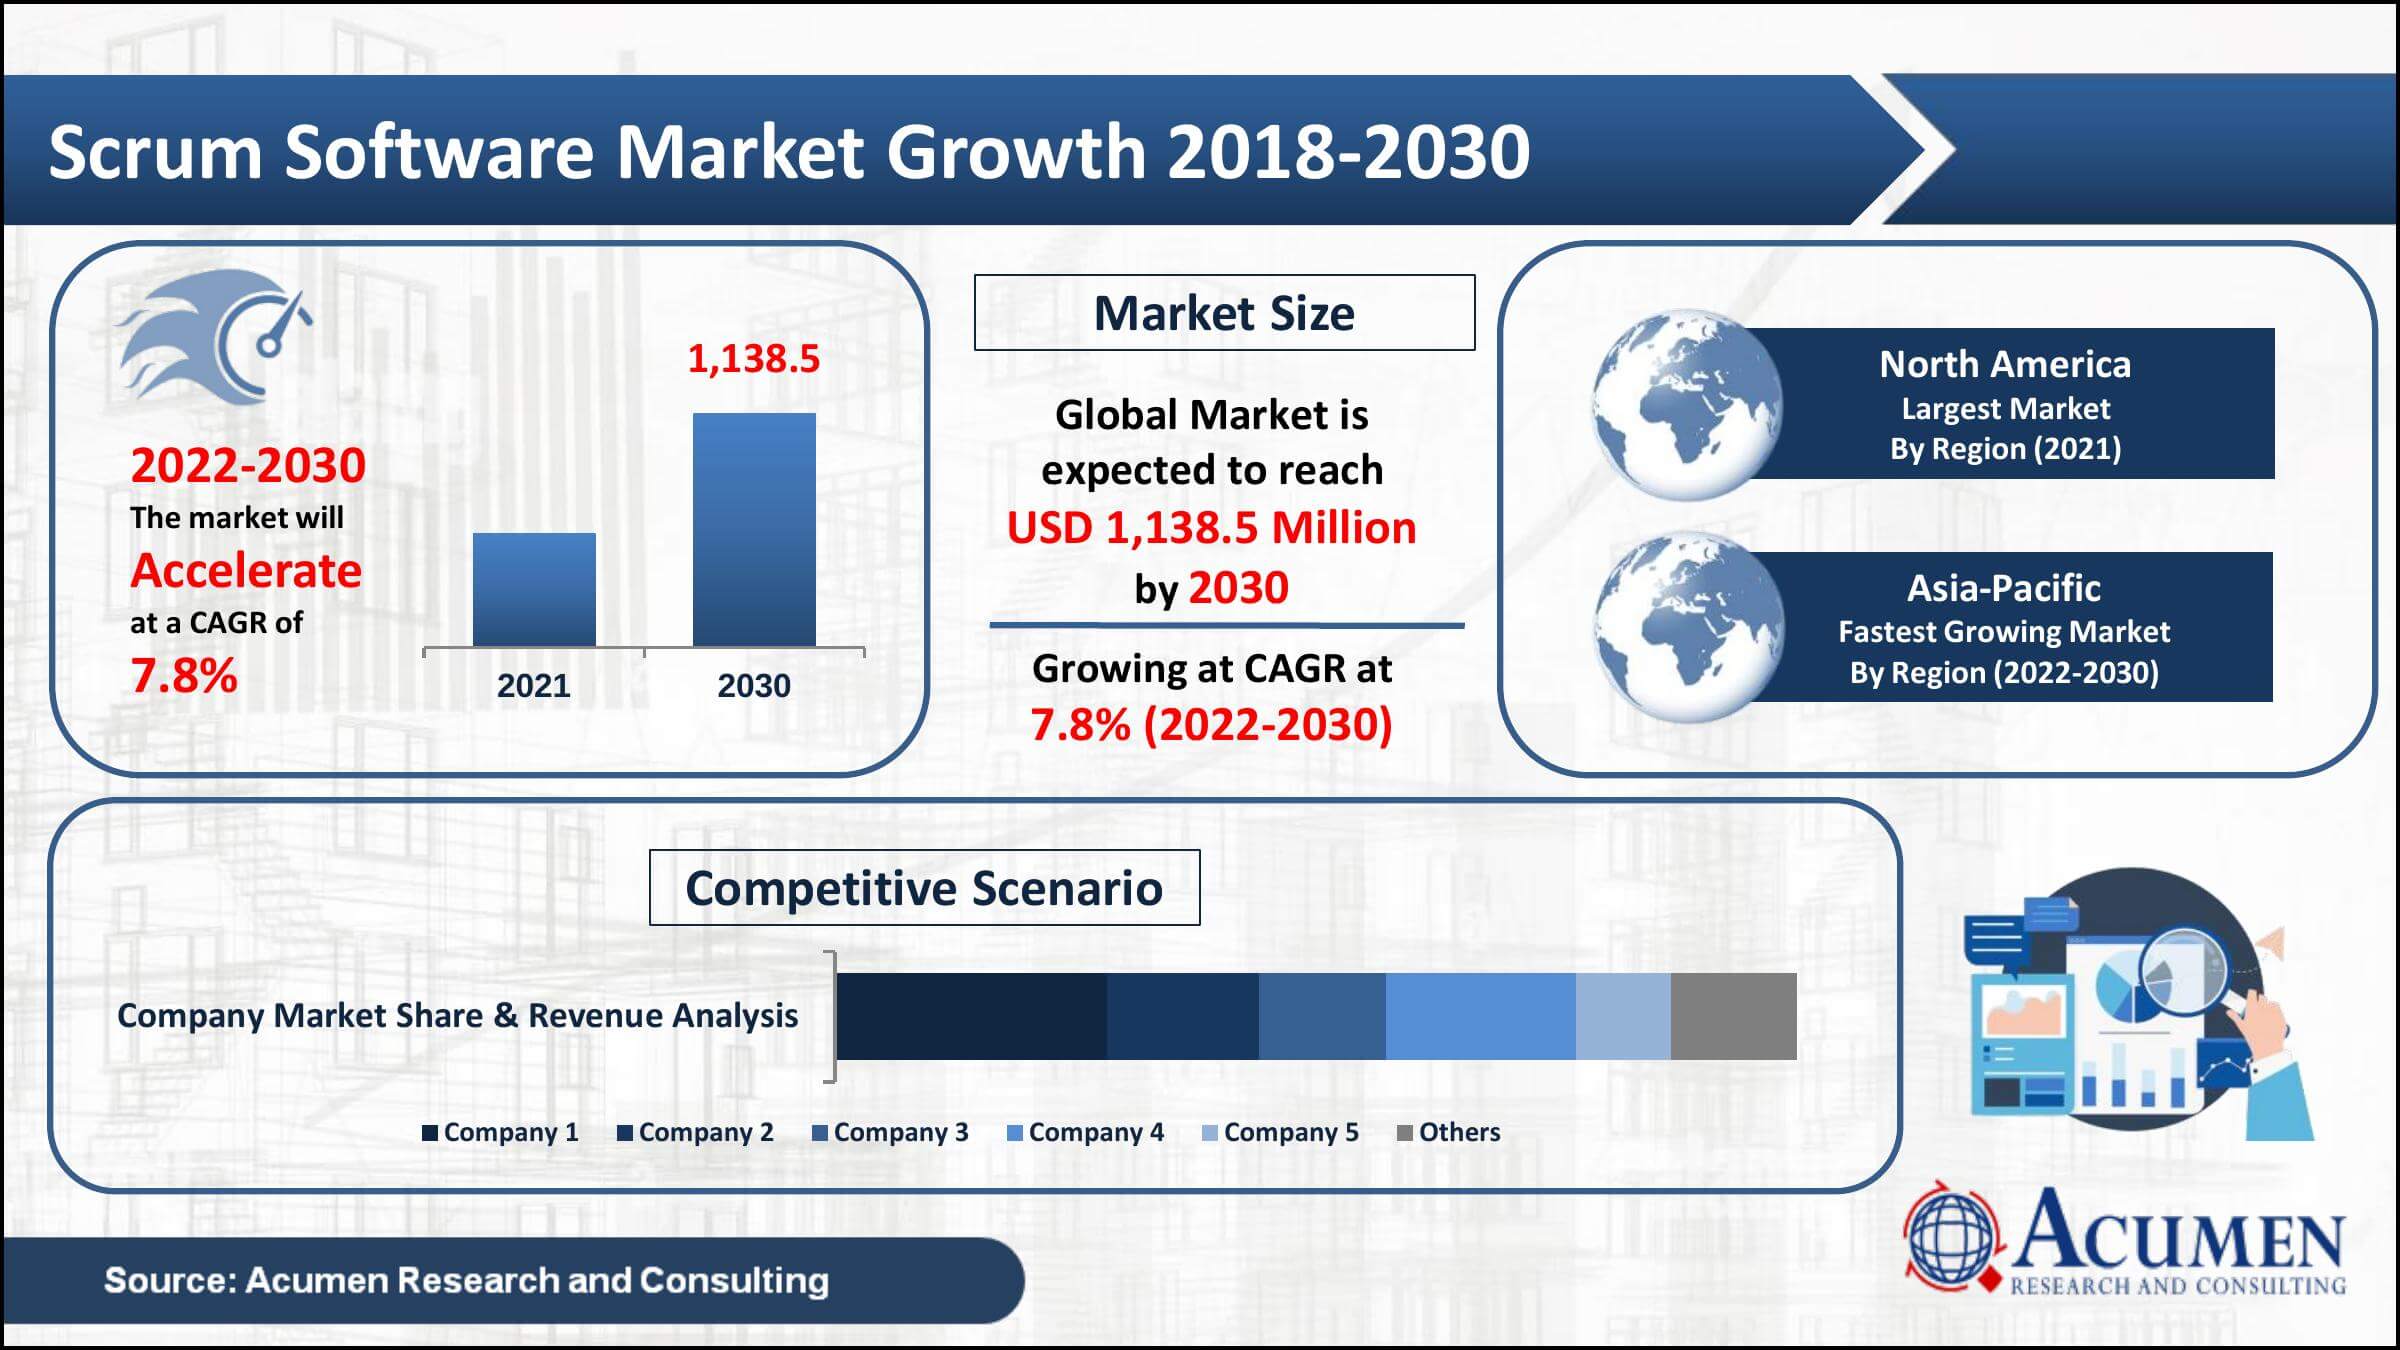 Scrum Software Market value to reach USD 1,138.5 Million by 2030 at CAGR 7.8%